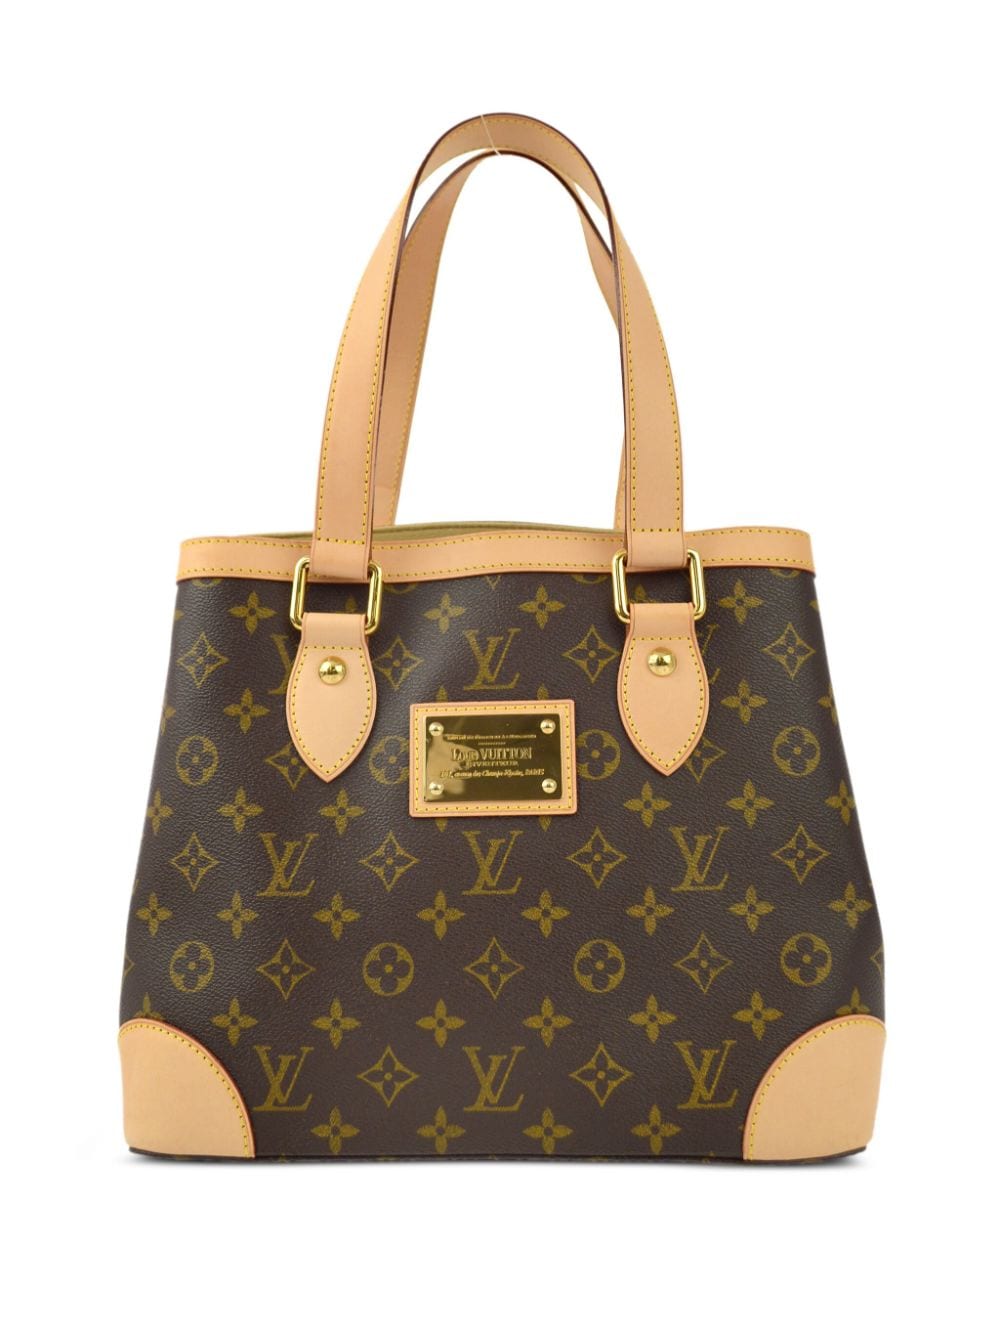 Louis Vuitton Pre-Owned 2009 pre-owned Hampstead PM Handtasche - Braun von Louis Vuitton Pre-Owned